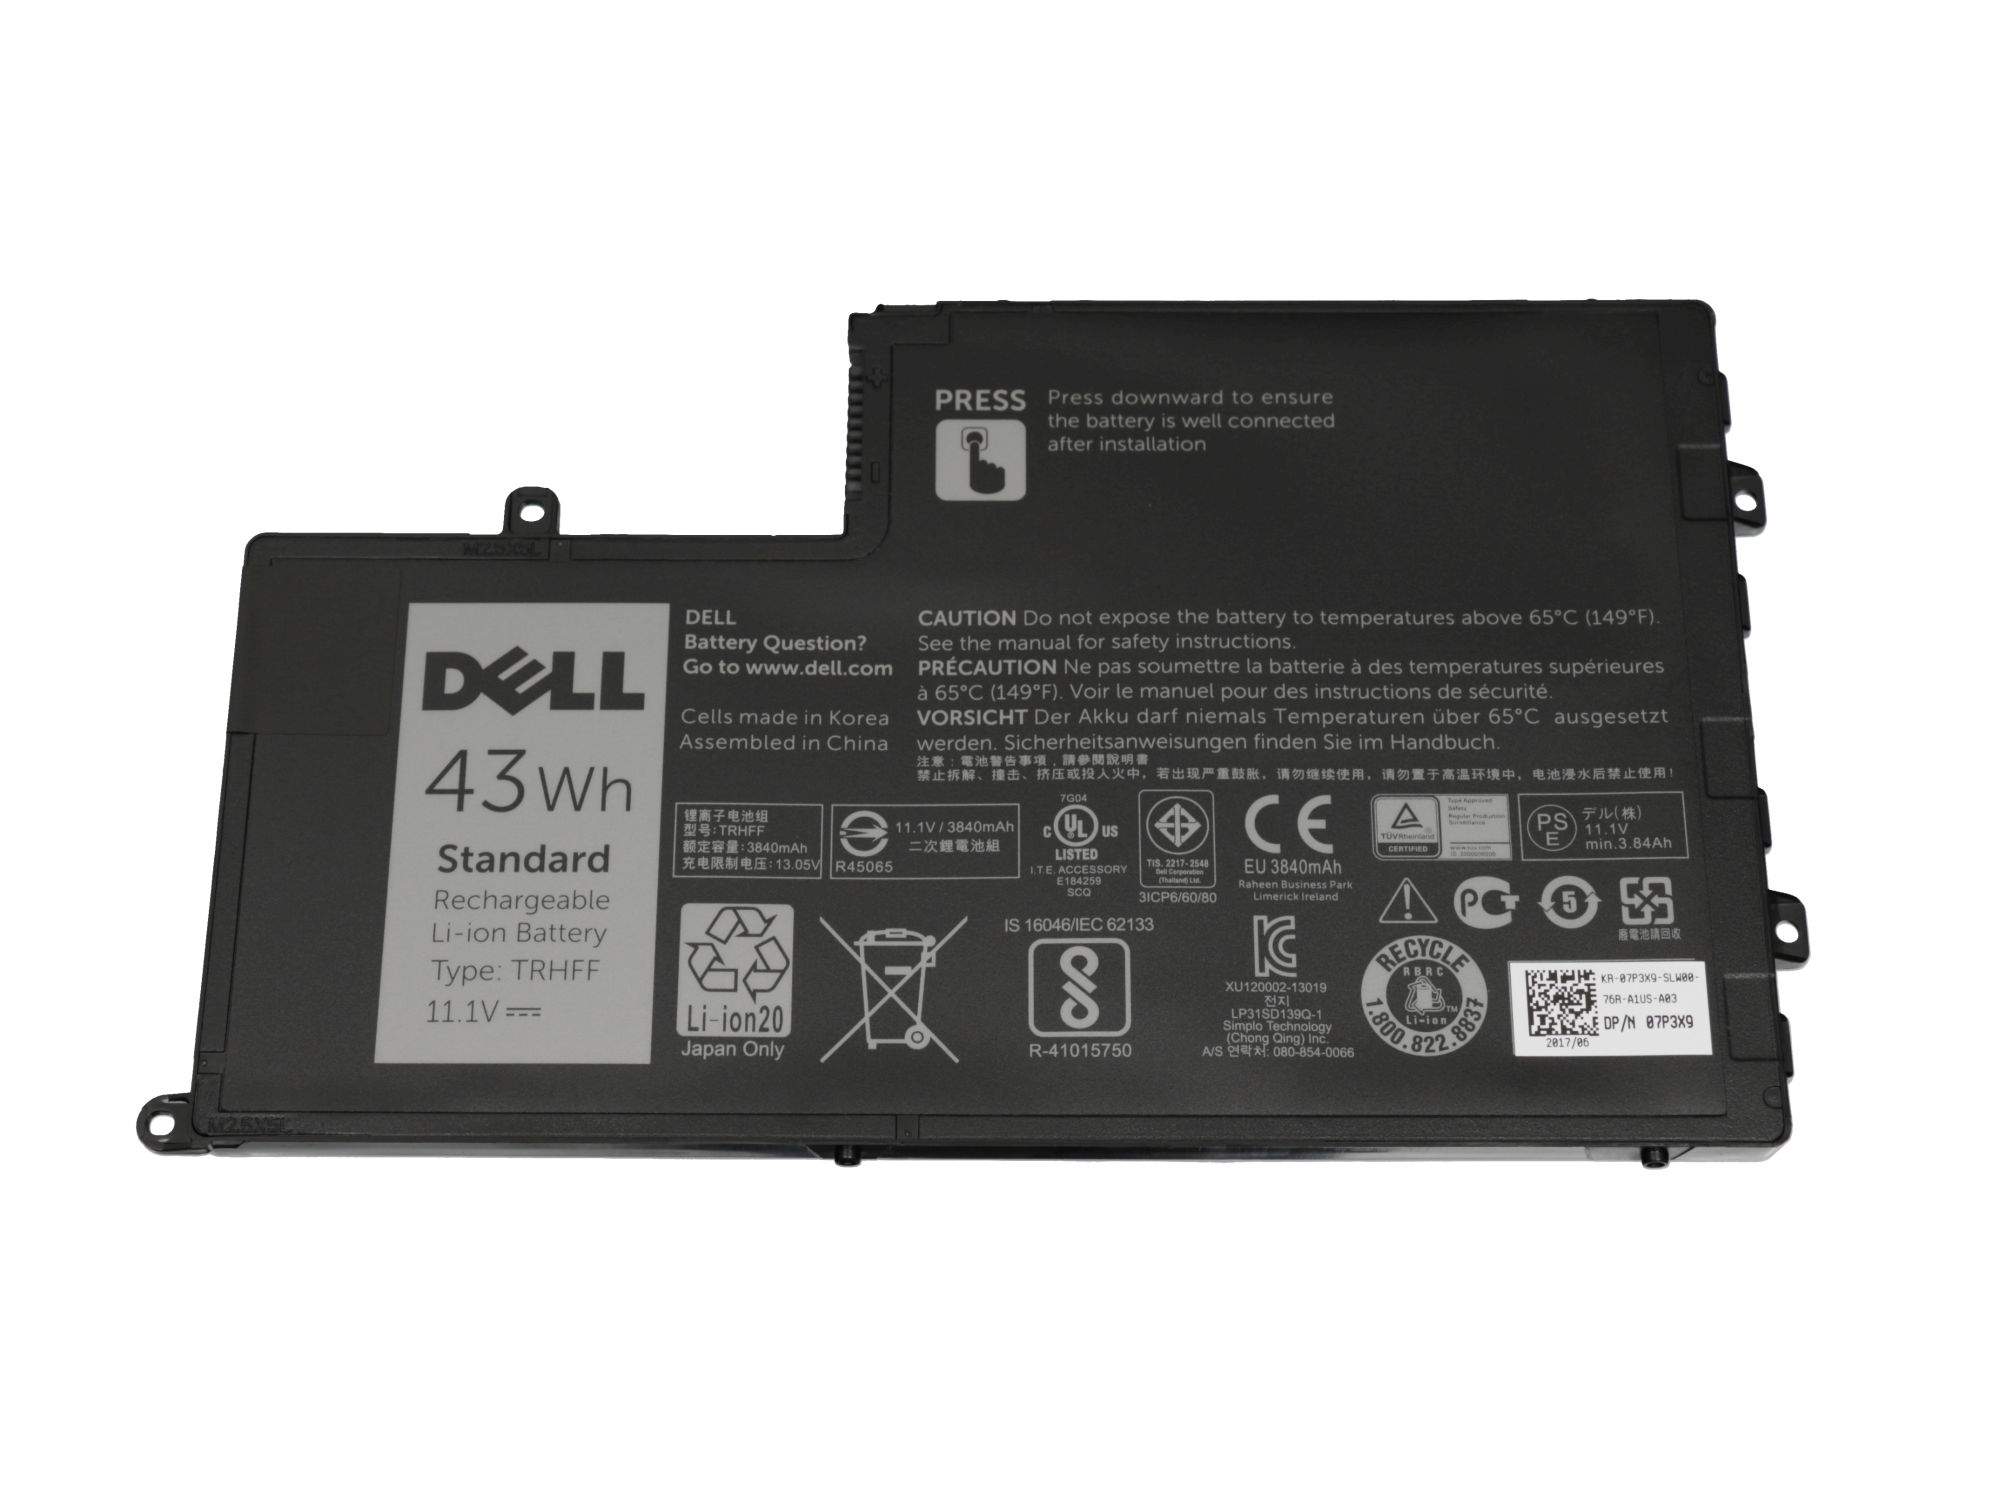 DELL Battery 43WHR 3 Cell Lithium